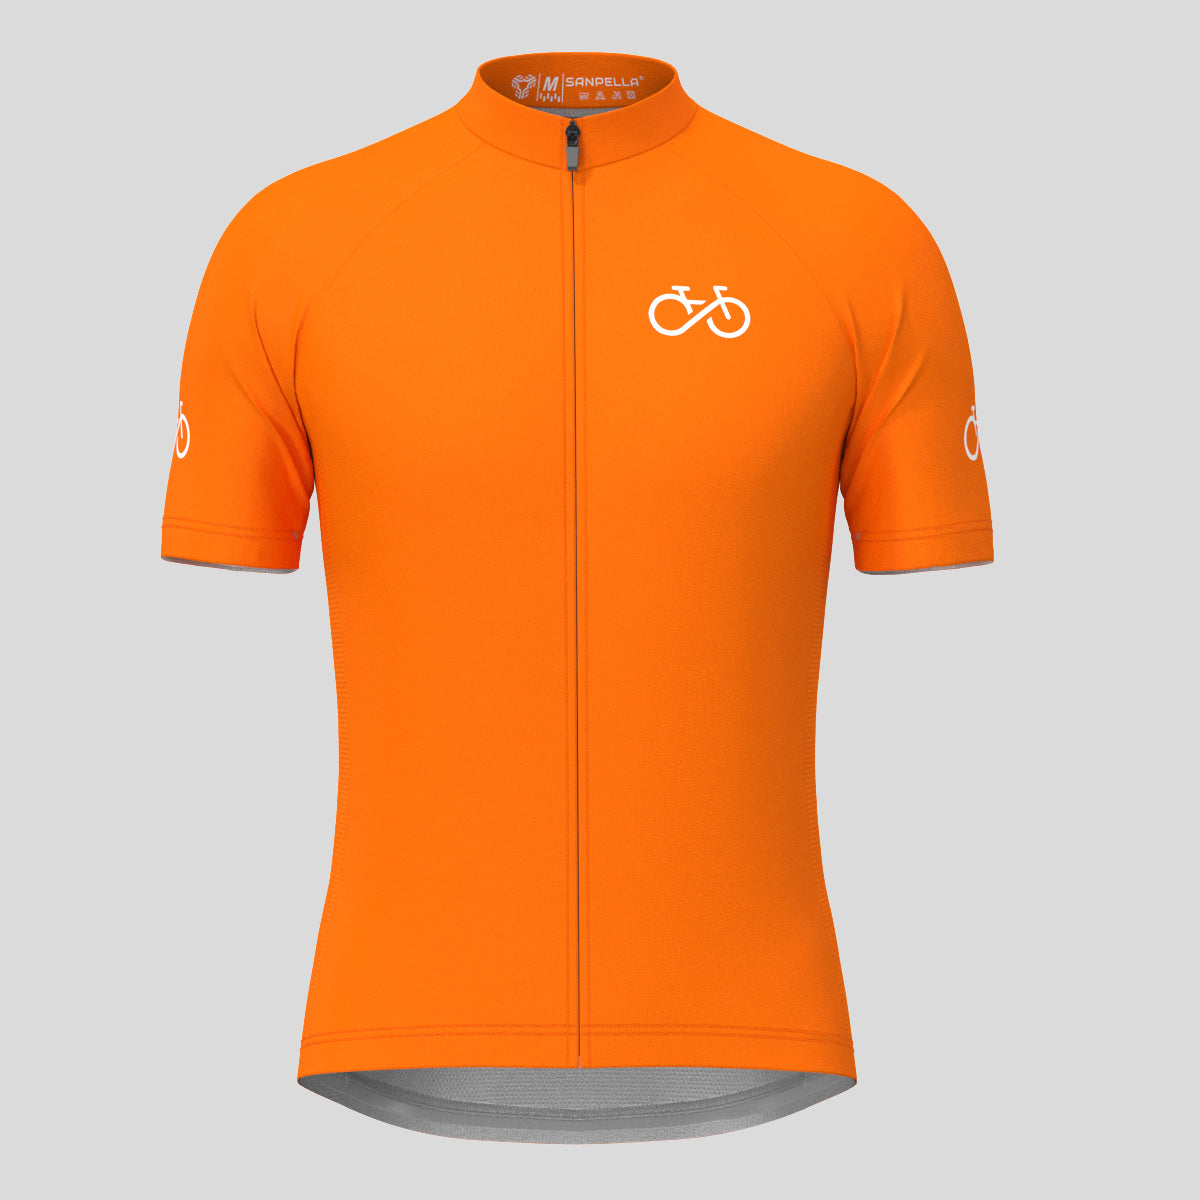 Ride Forever Men's Cycling Jersey -Orange